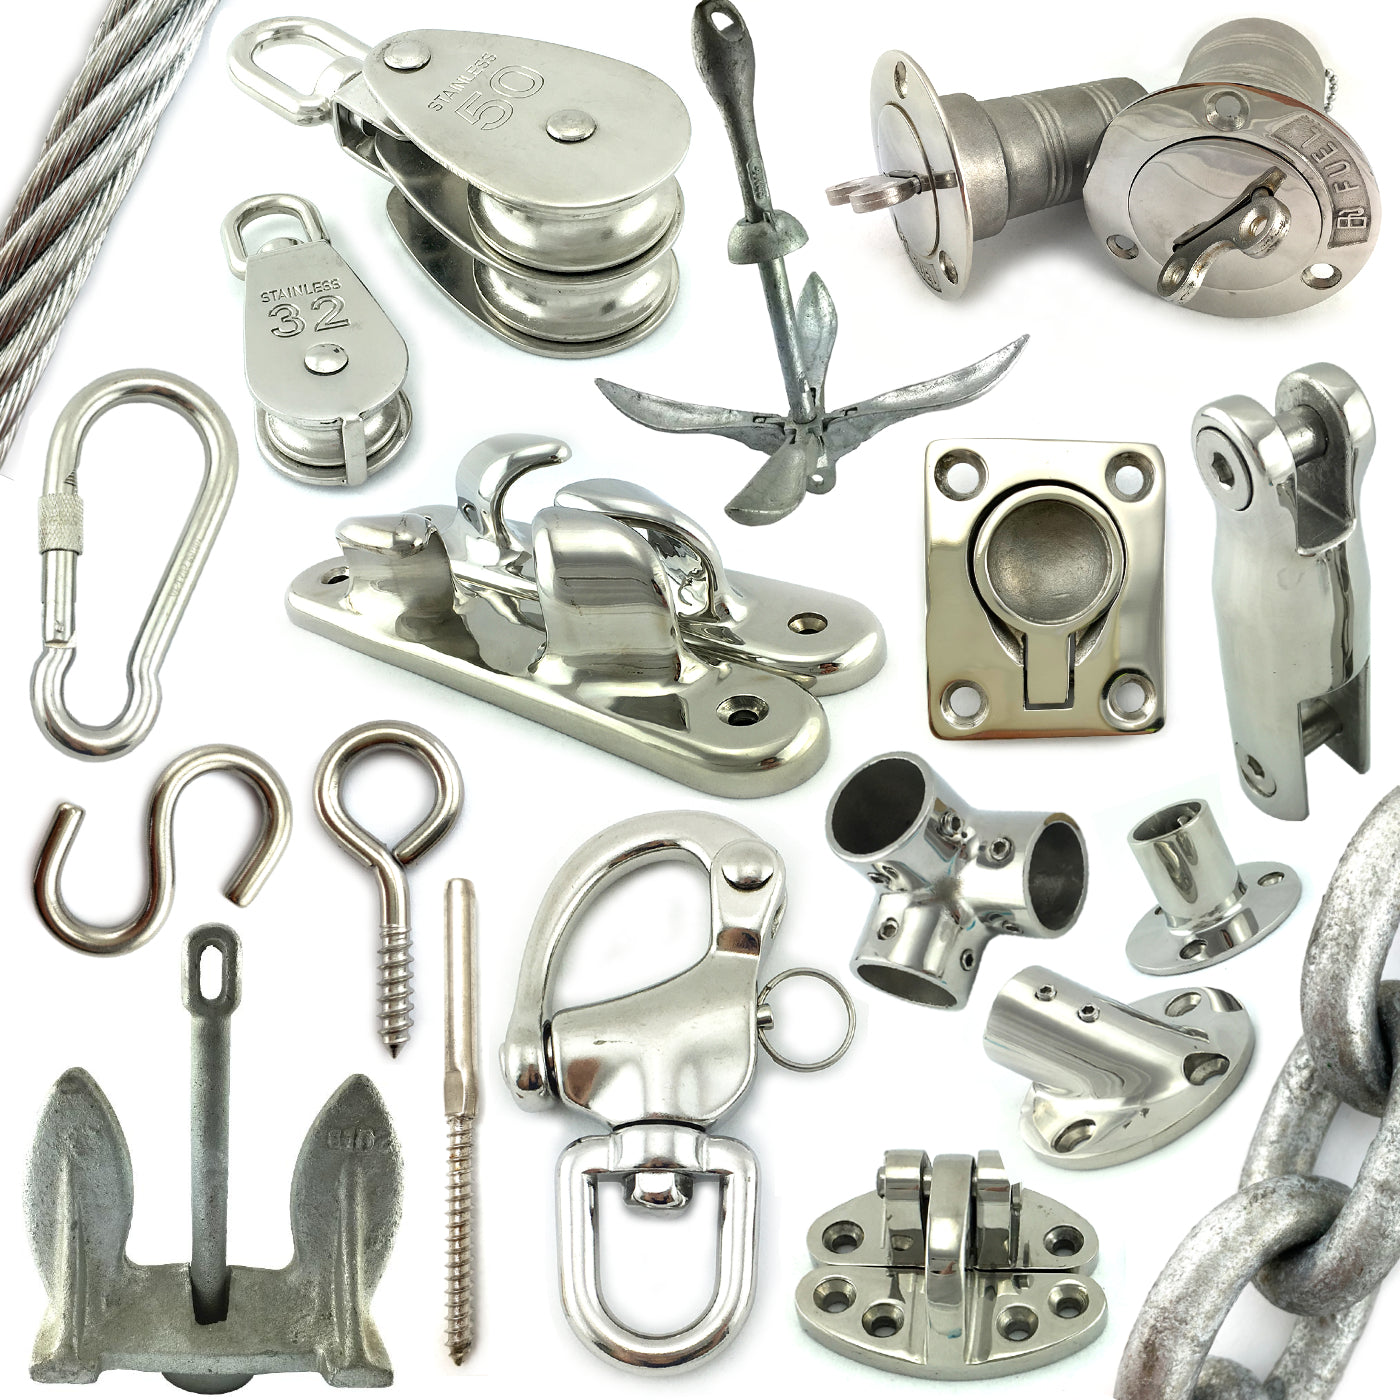 Marine and boating fittings, anchors, and safety equipment. Shop chain.com.au. Australia wide shipping